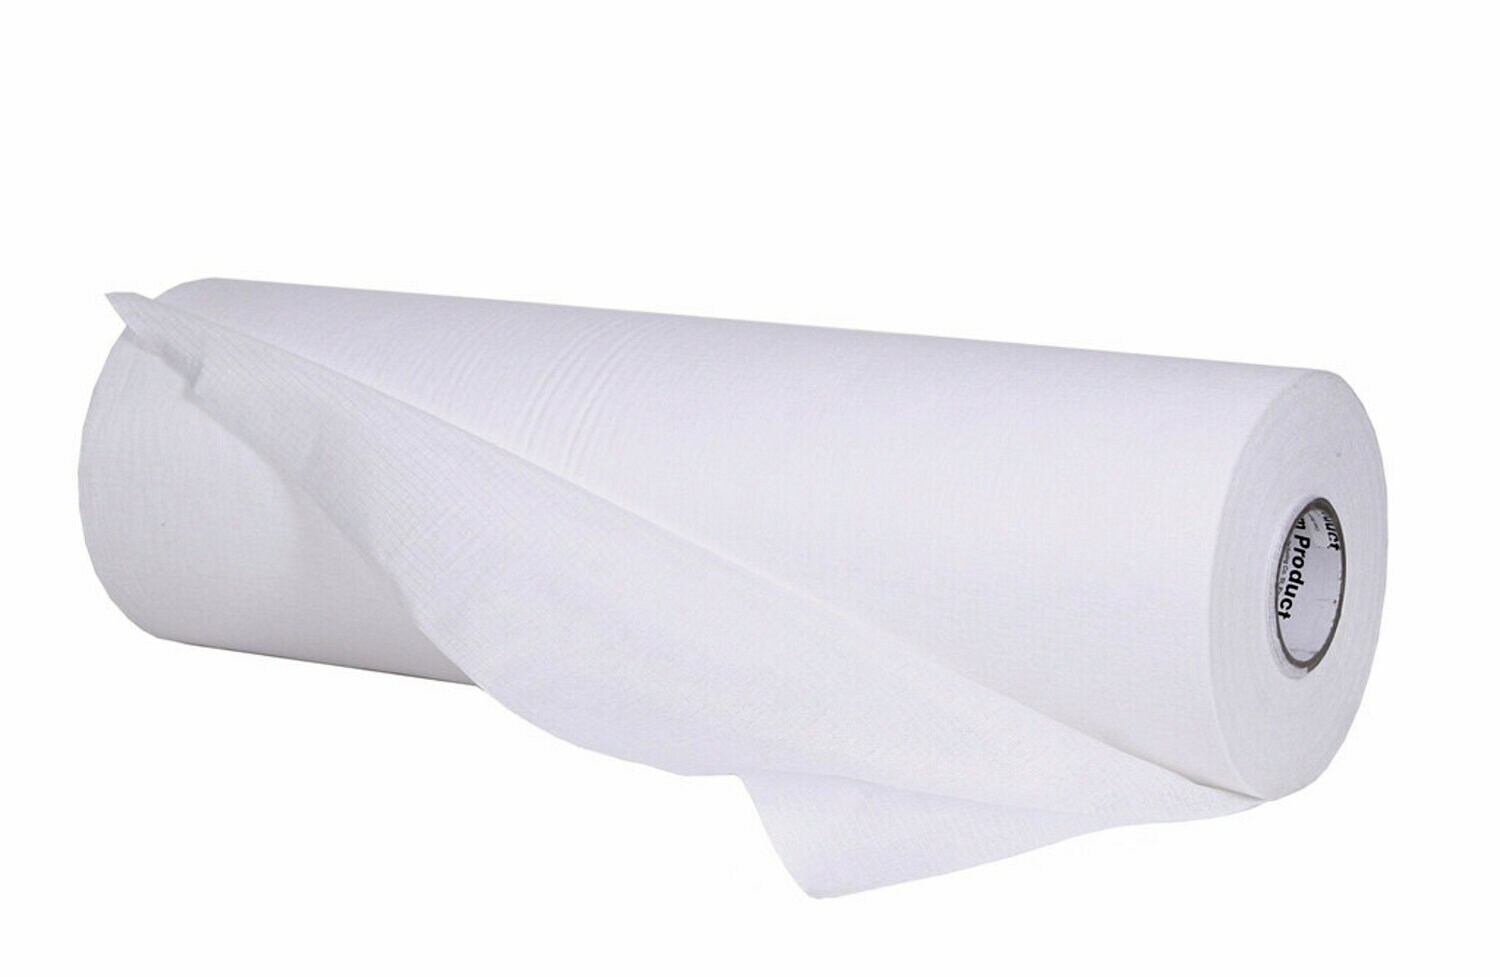 7100230691 - 3M Dirt Trap Protection Material 36852, White, 28 in x 300 ft, 1 Roll/Case